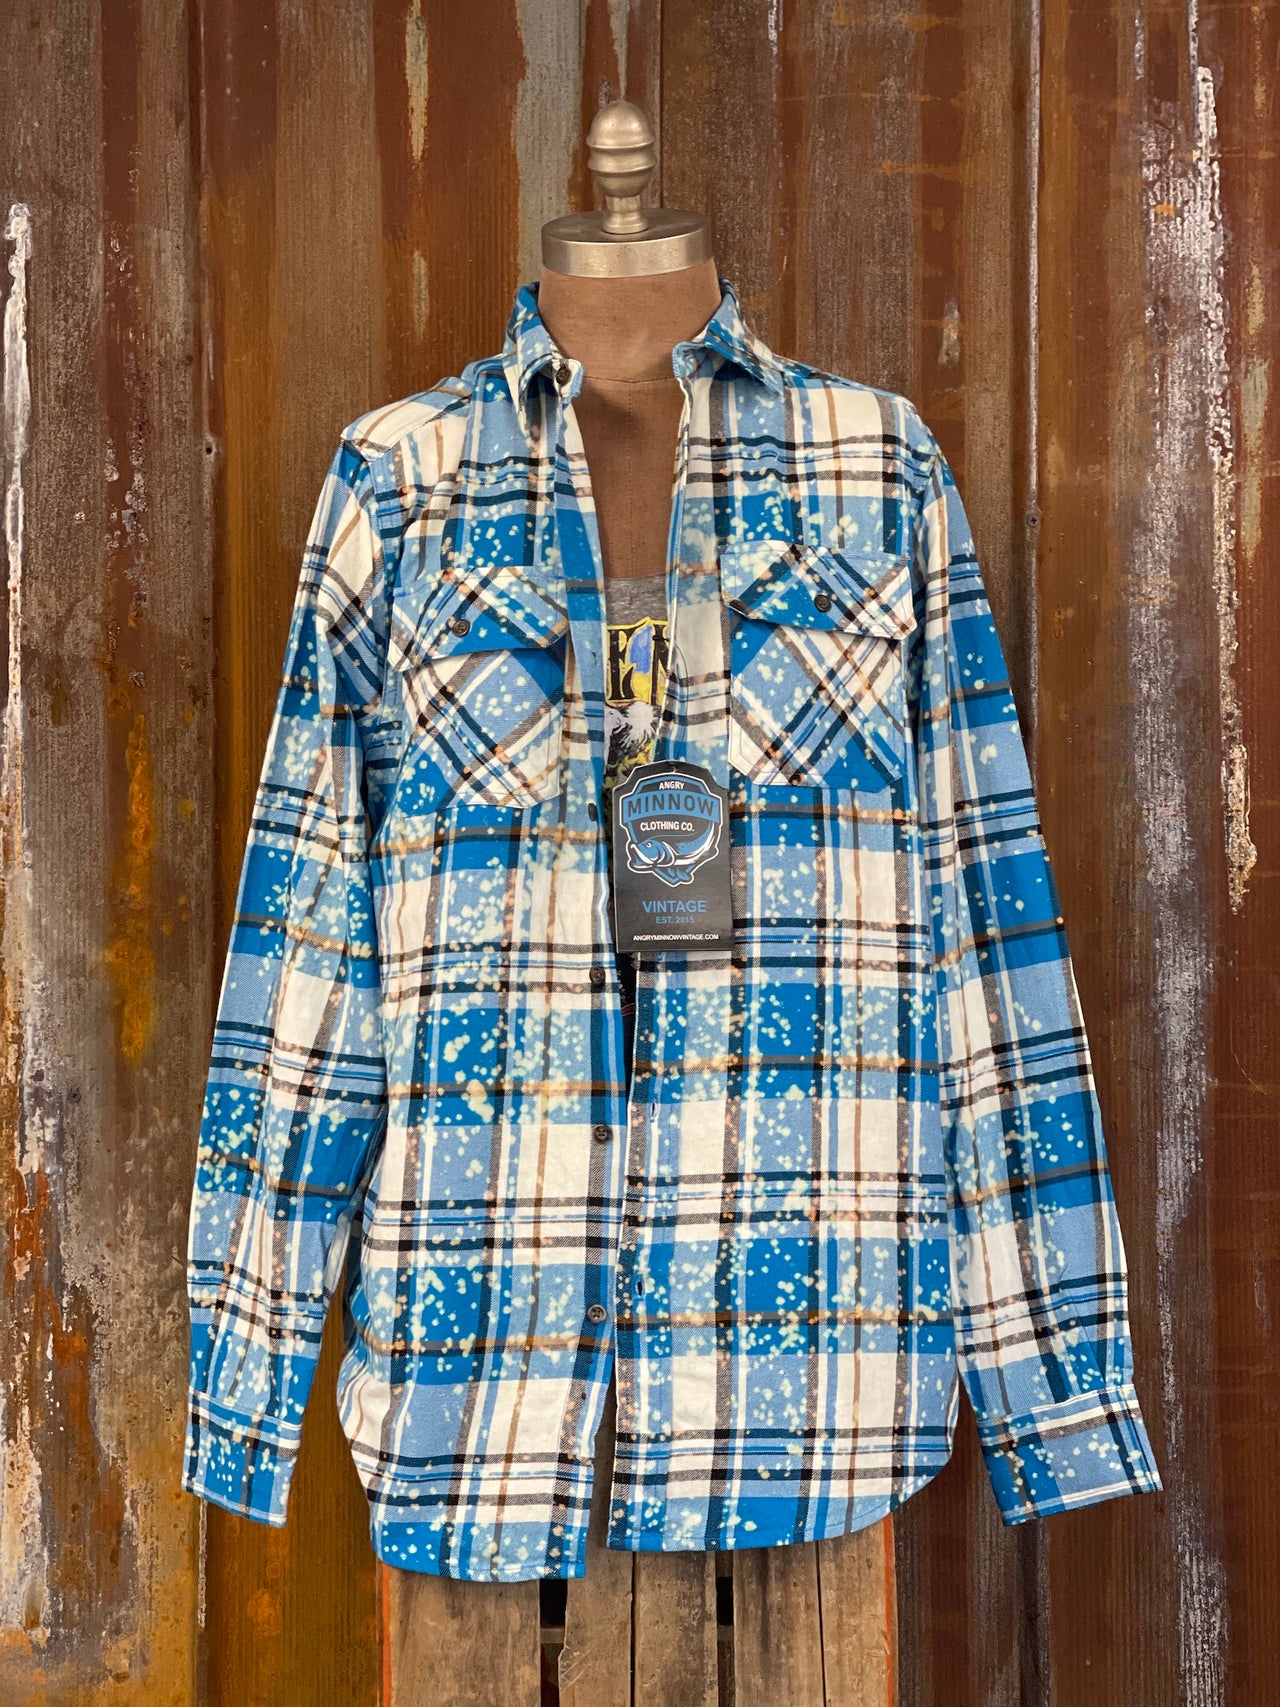 The Lake is Calling and I Must Go Art Flannel- Distressed Lakes Blue